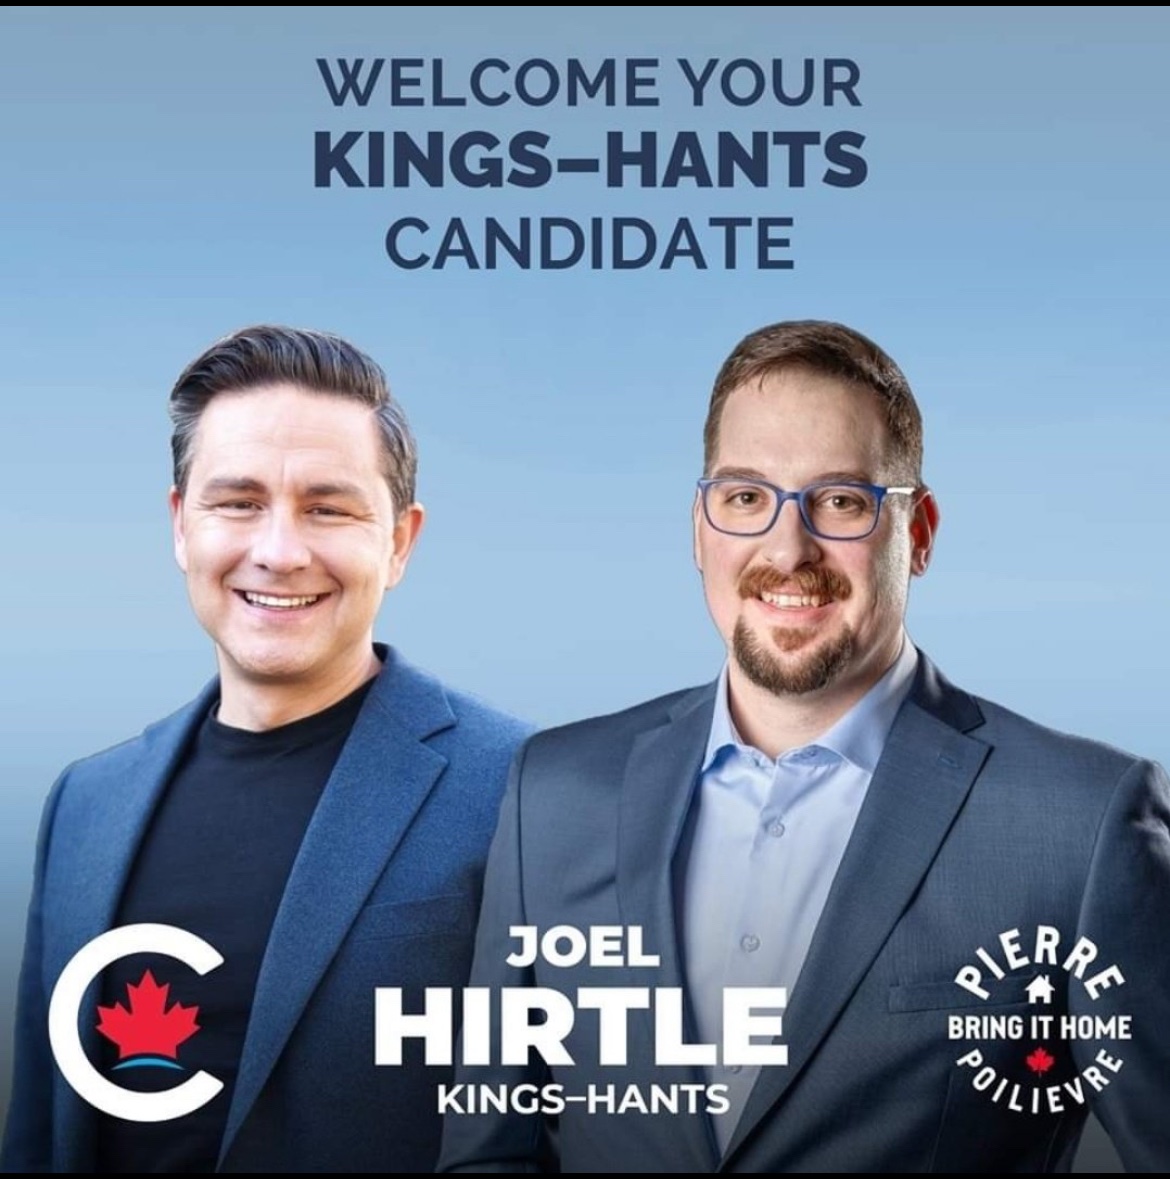 Congrats to Joel Hirtle, the newly nominated @CPC_HQ candidate in Kings-Hants. A Kings County Councillor, Joel will make a great MP championing #commonsense solutions to axe the carbon tax, build homes, fix the budget & fight crime #cdnpoli #nspoli #Pierre4PM